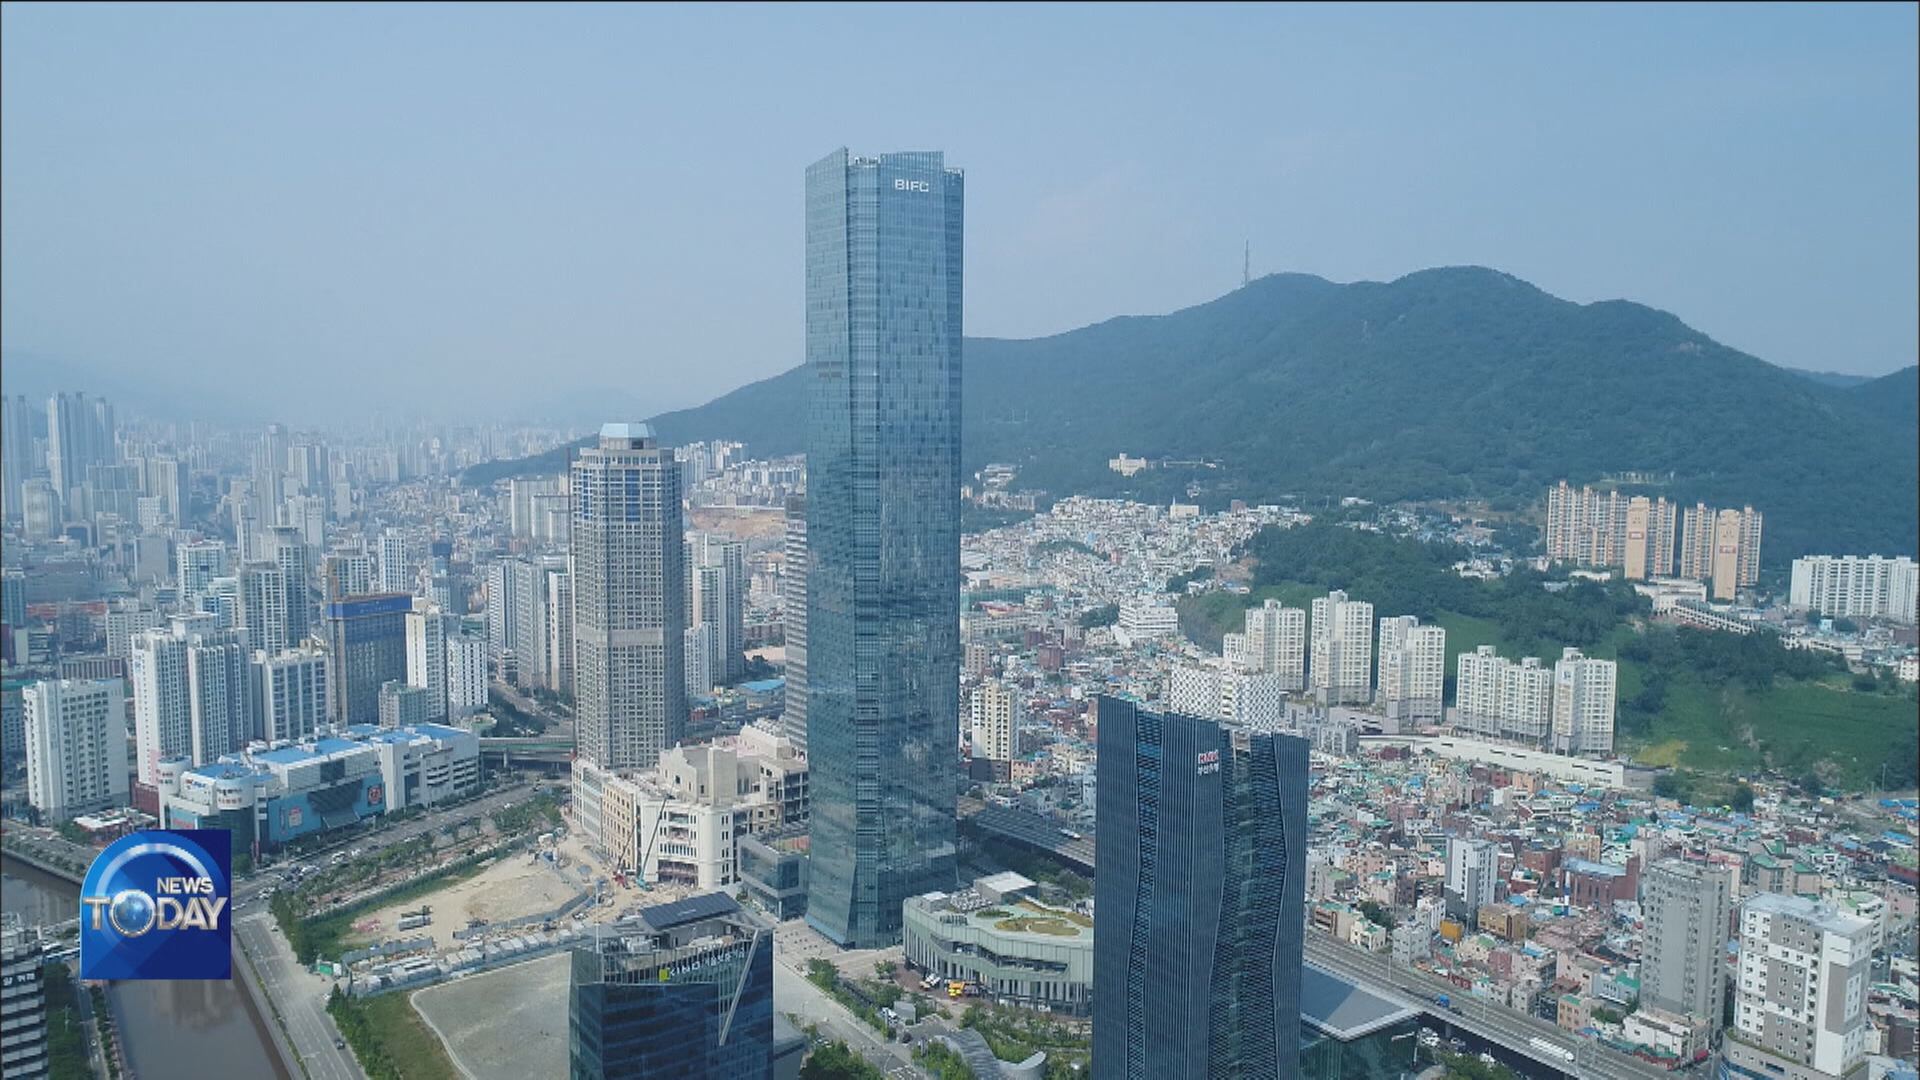 BUSAN ATTRACTS FOREIGN FINANCIAL CORPORATIONS